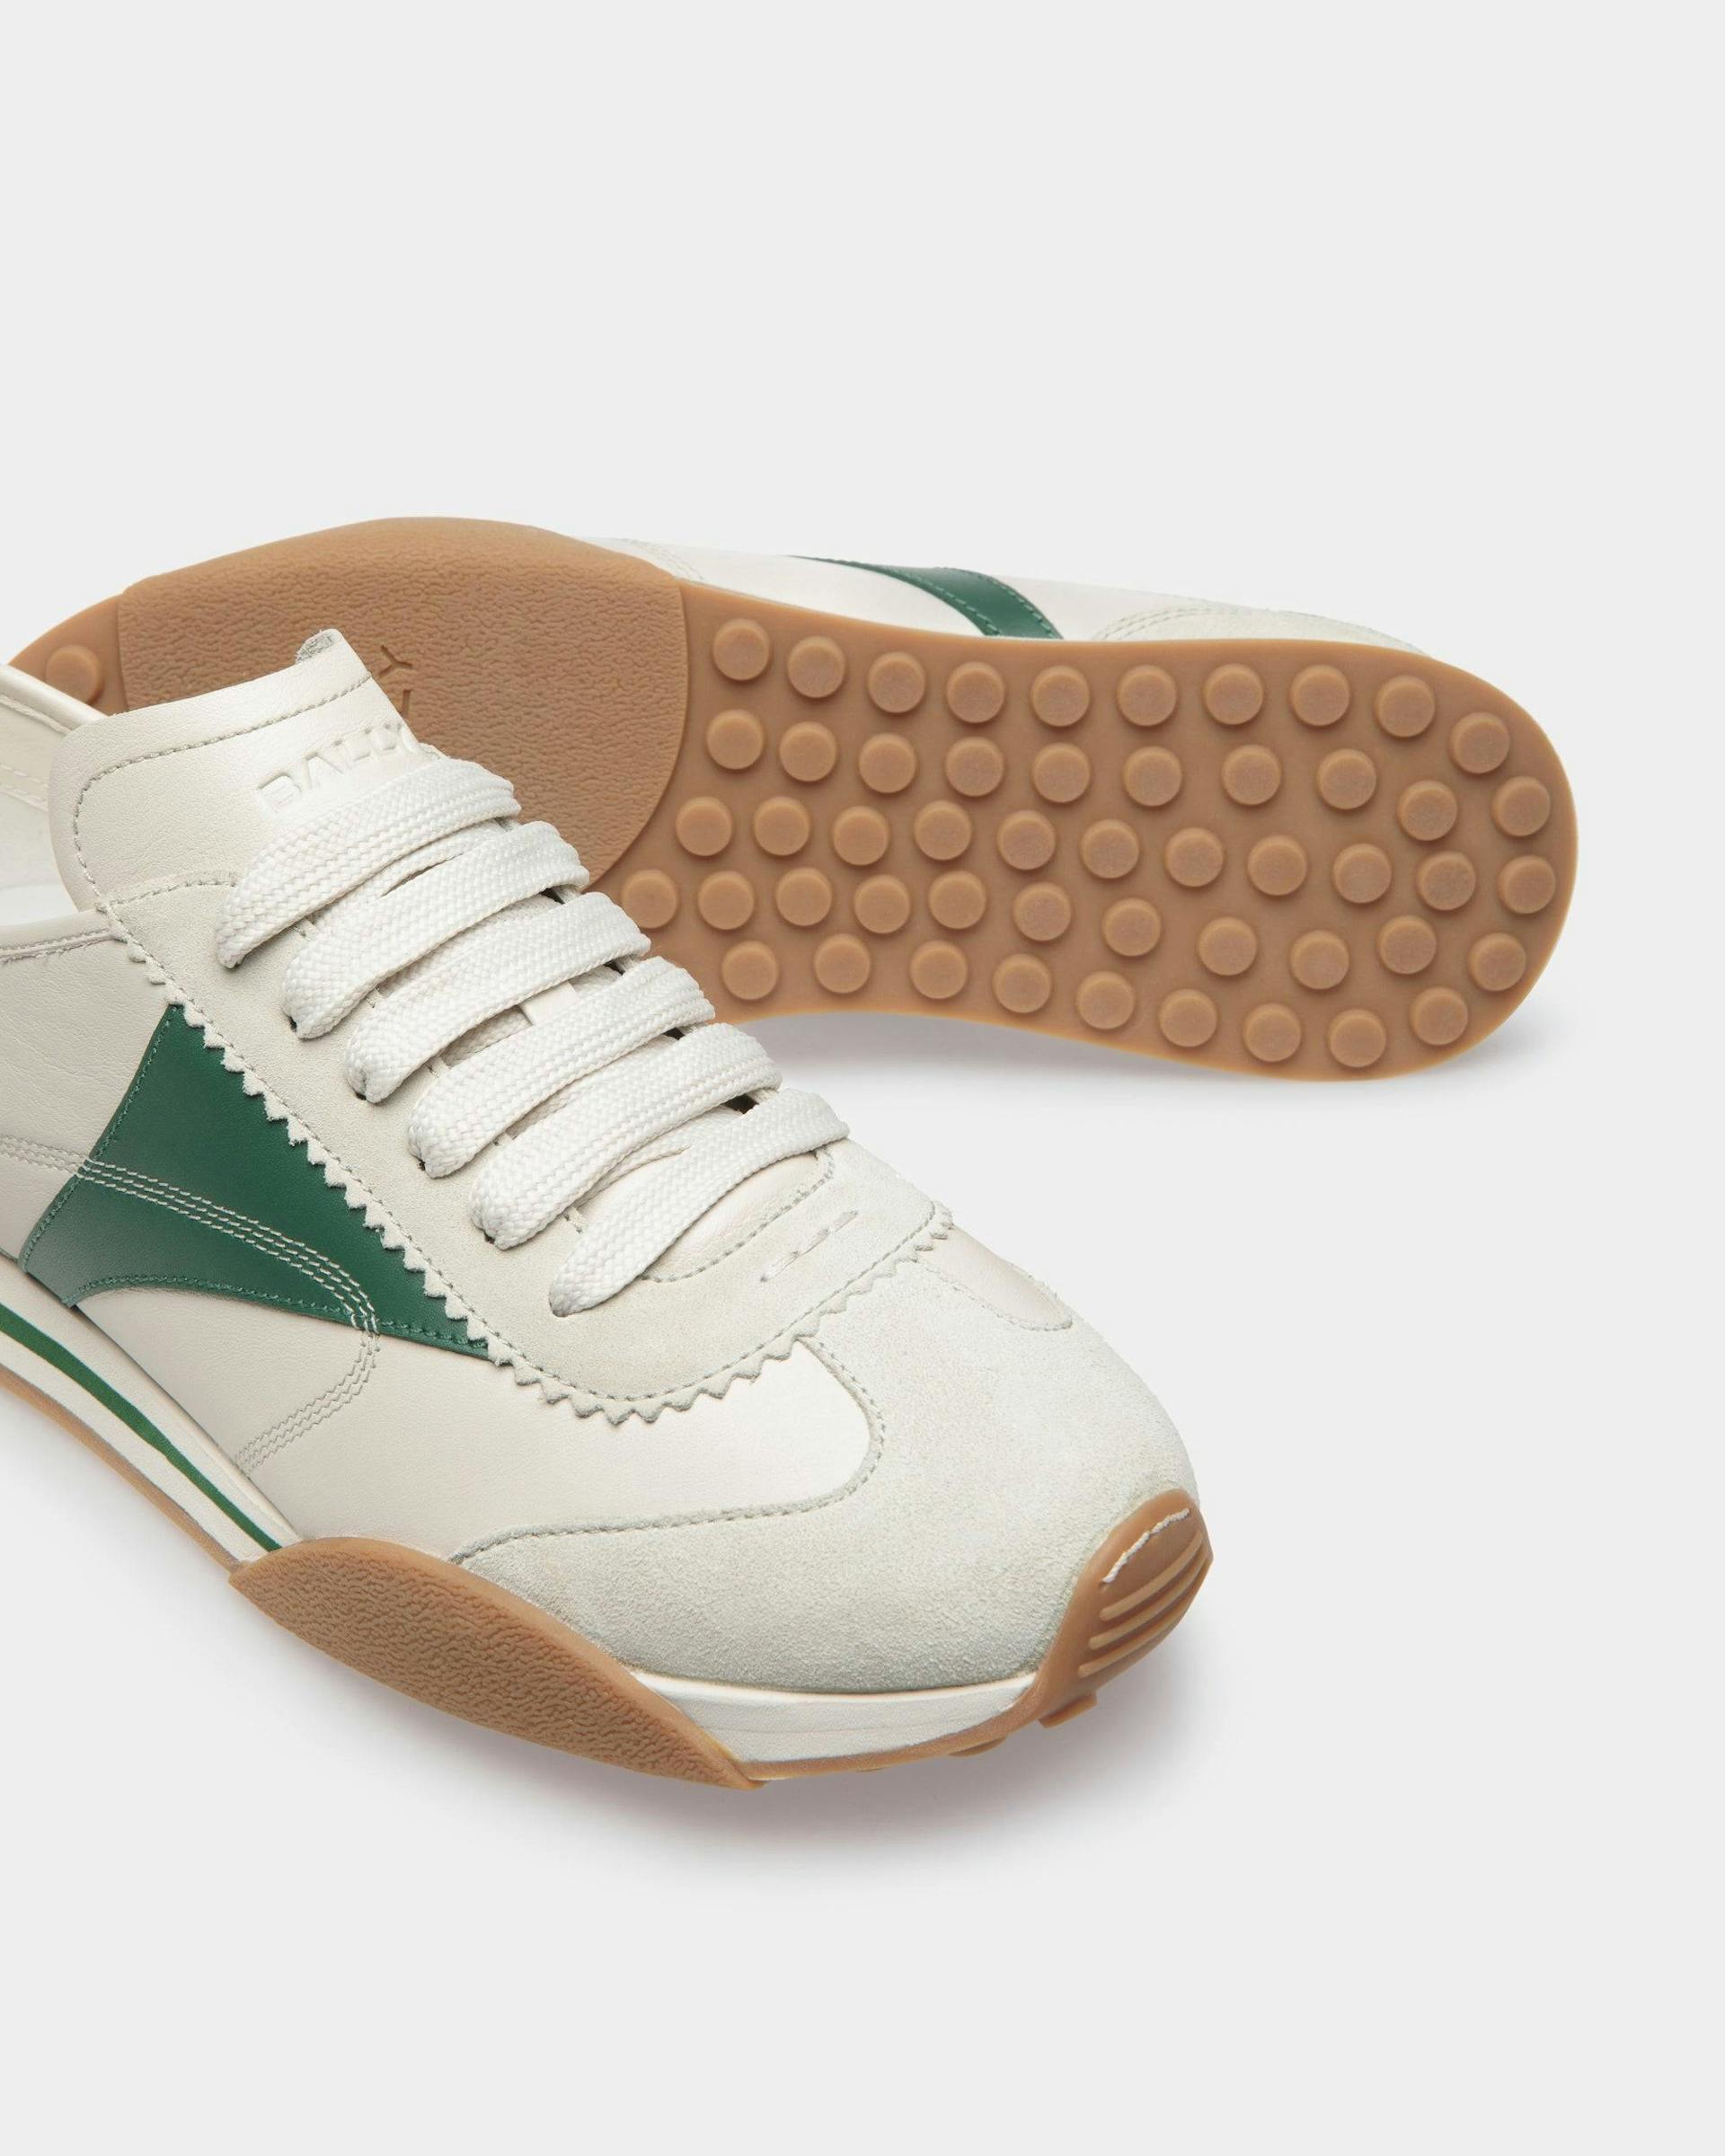 Sussex Sneakers In Dusty White And Kelly Green Leather - Men's - Bally - 05